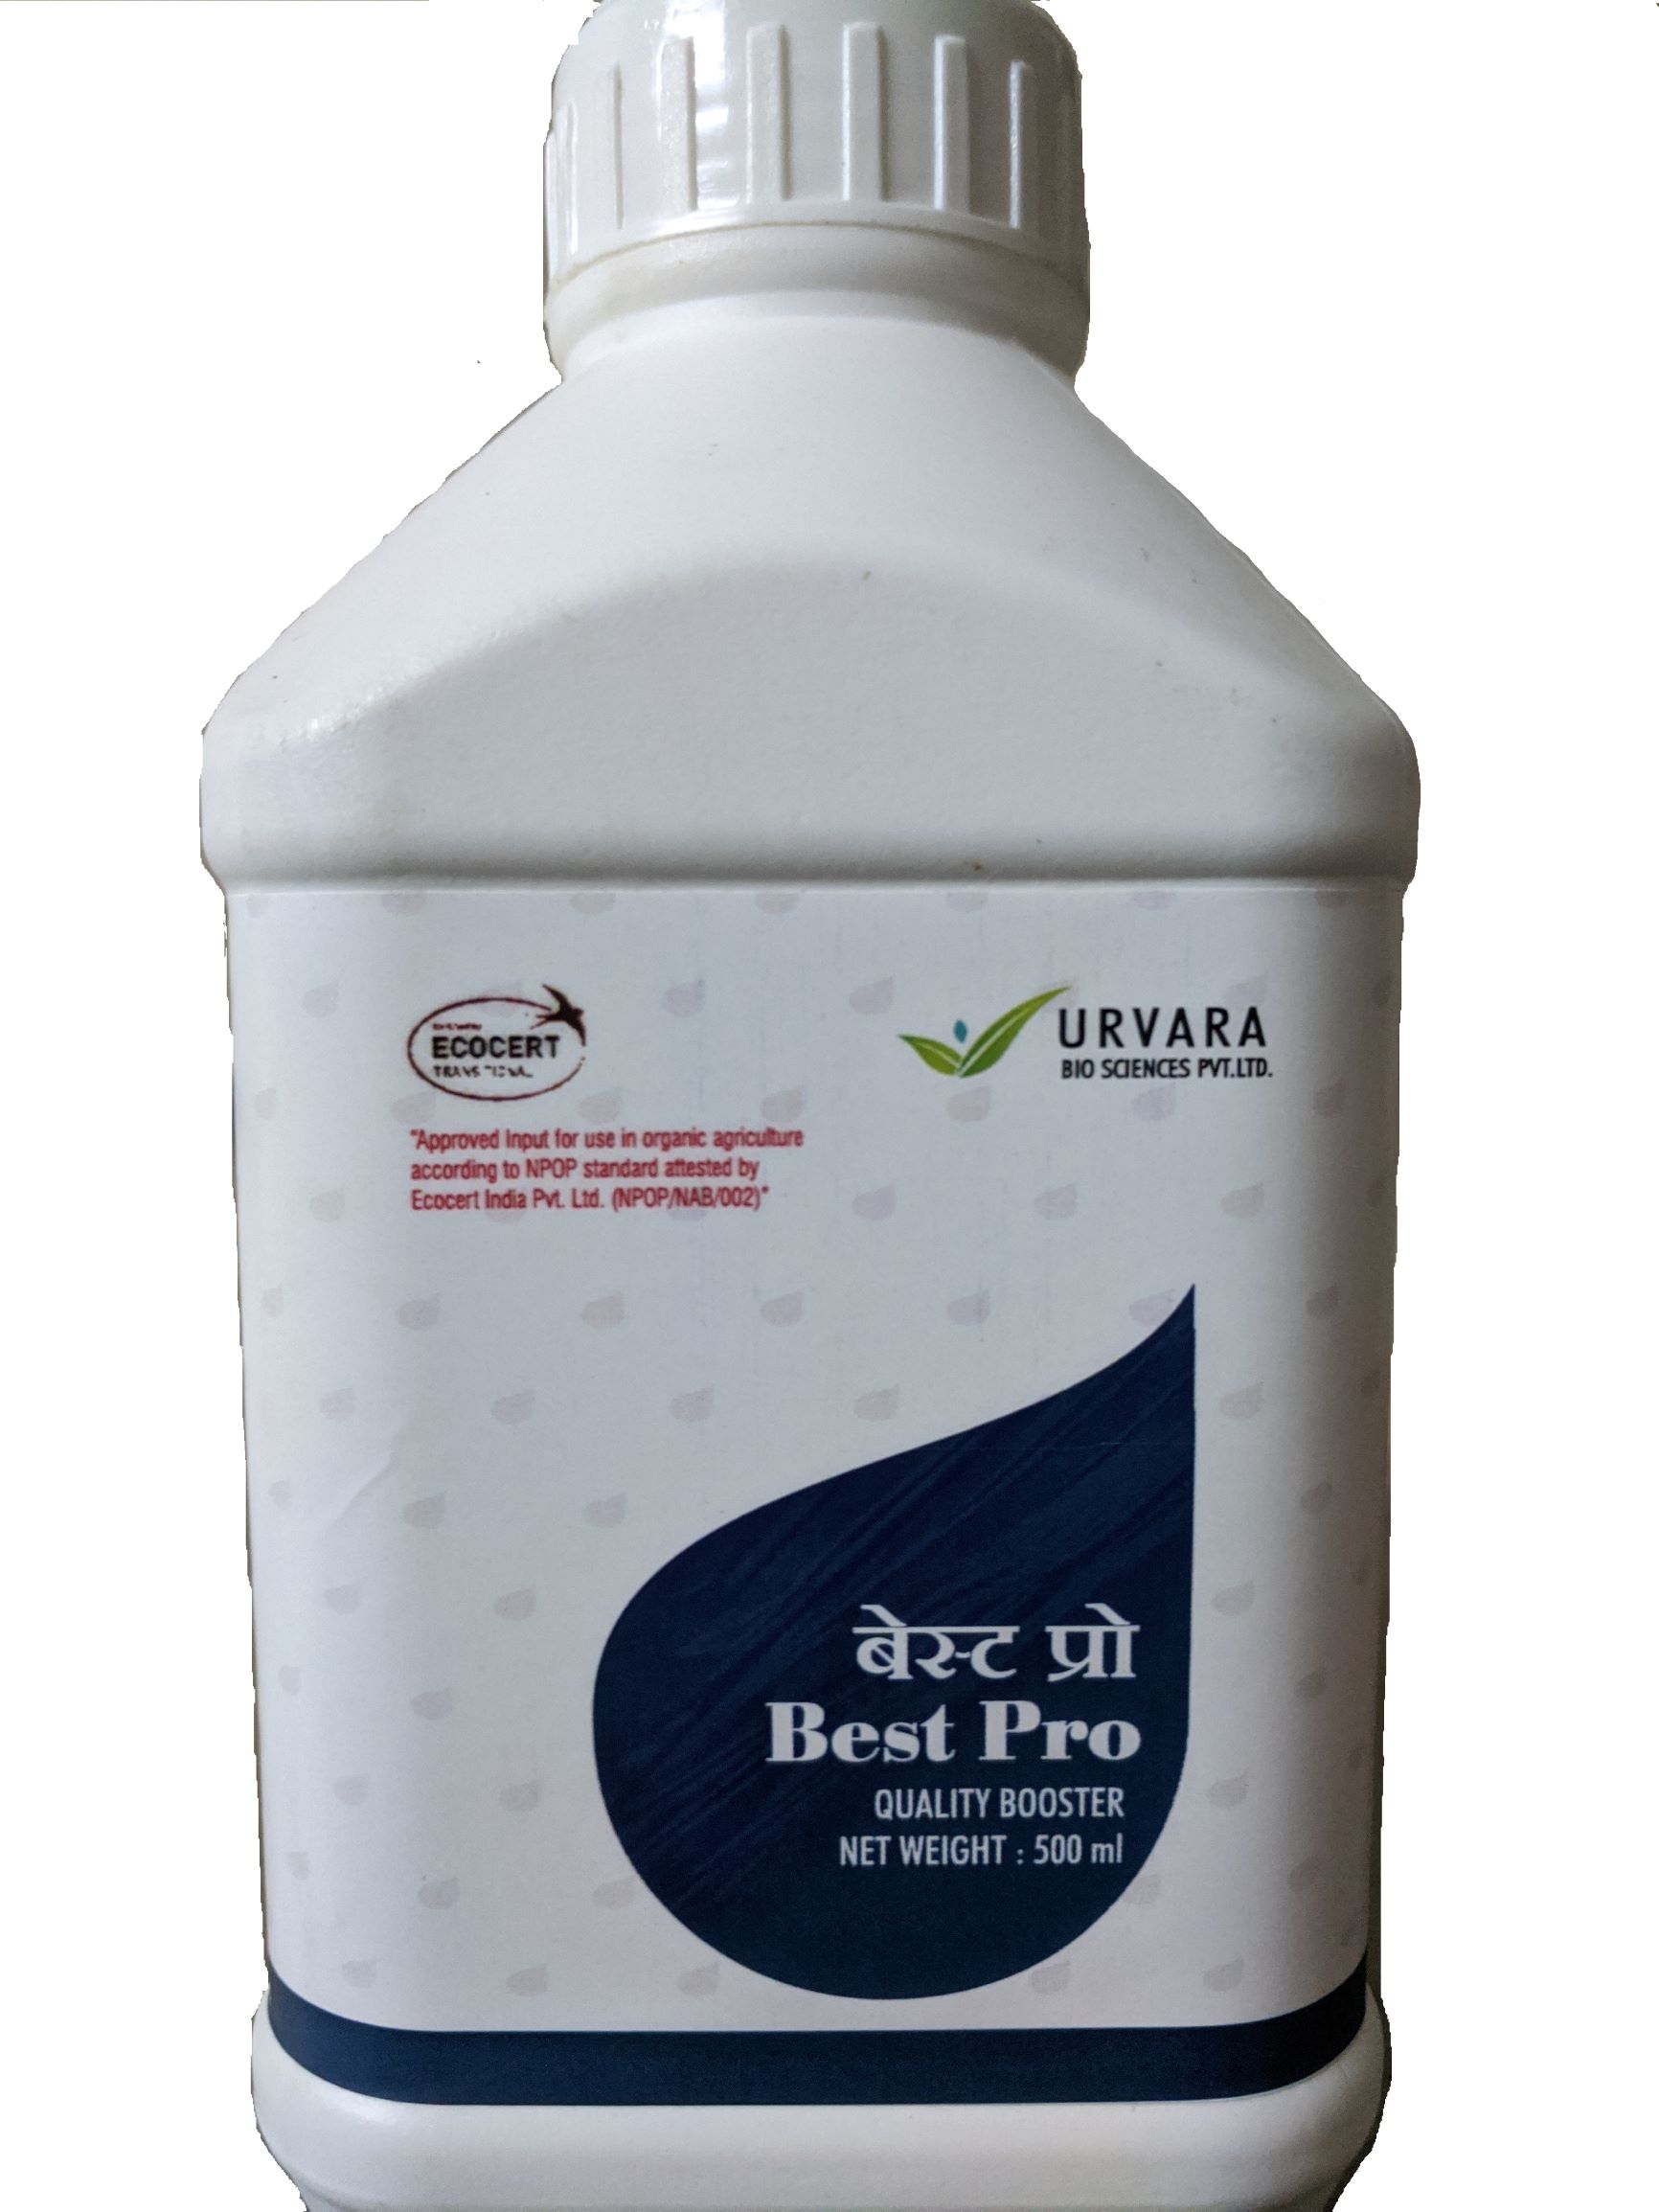 BEST PRO - Best Flowering Stimulant, Increase Root Growth 